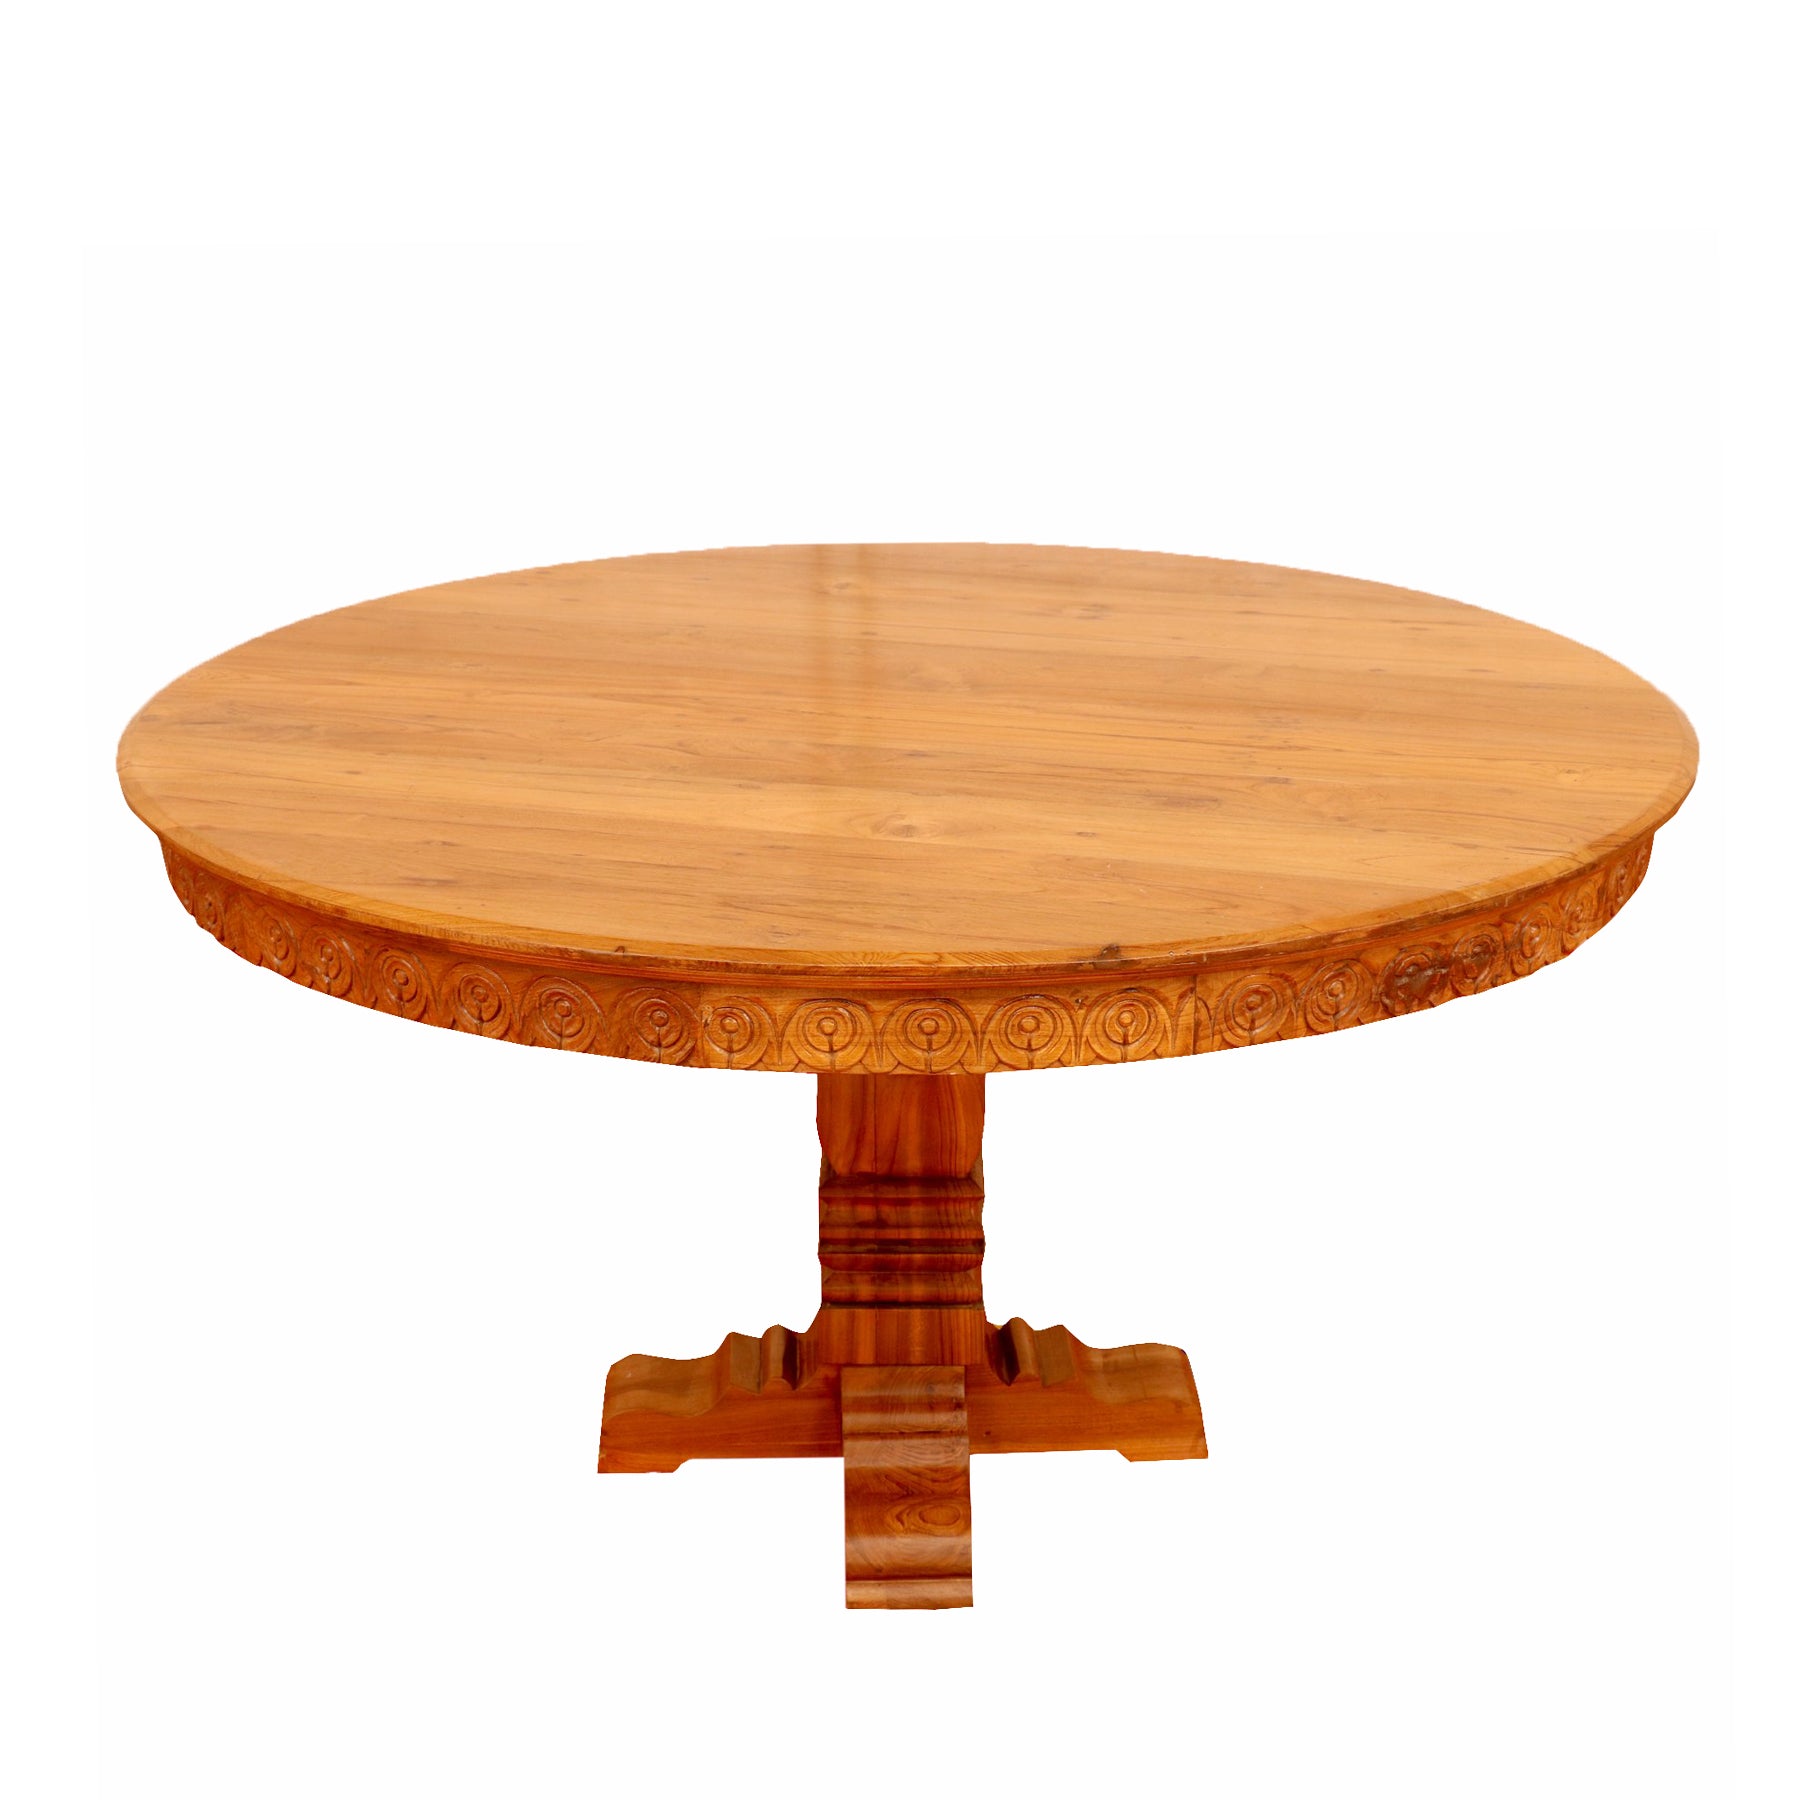 Teak wood Rounded carving Table Dining Table